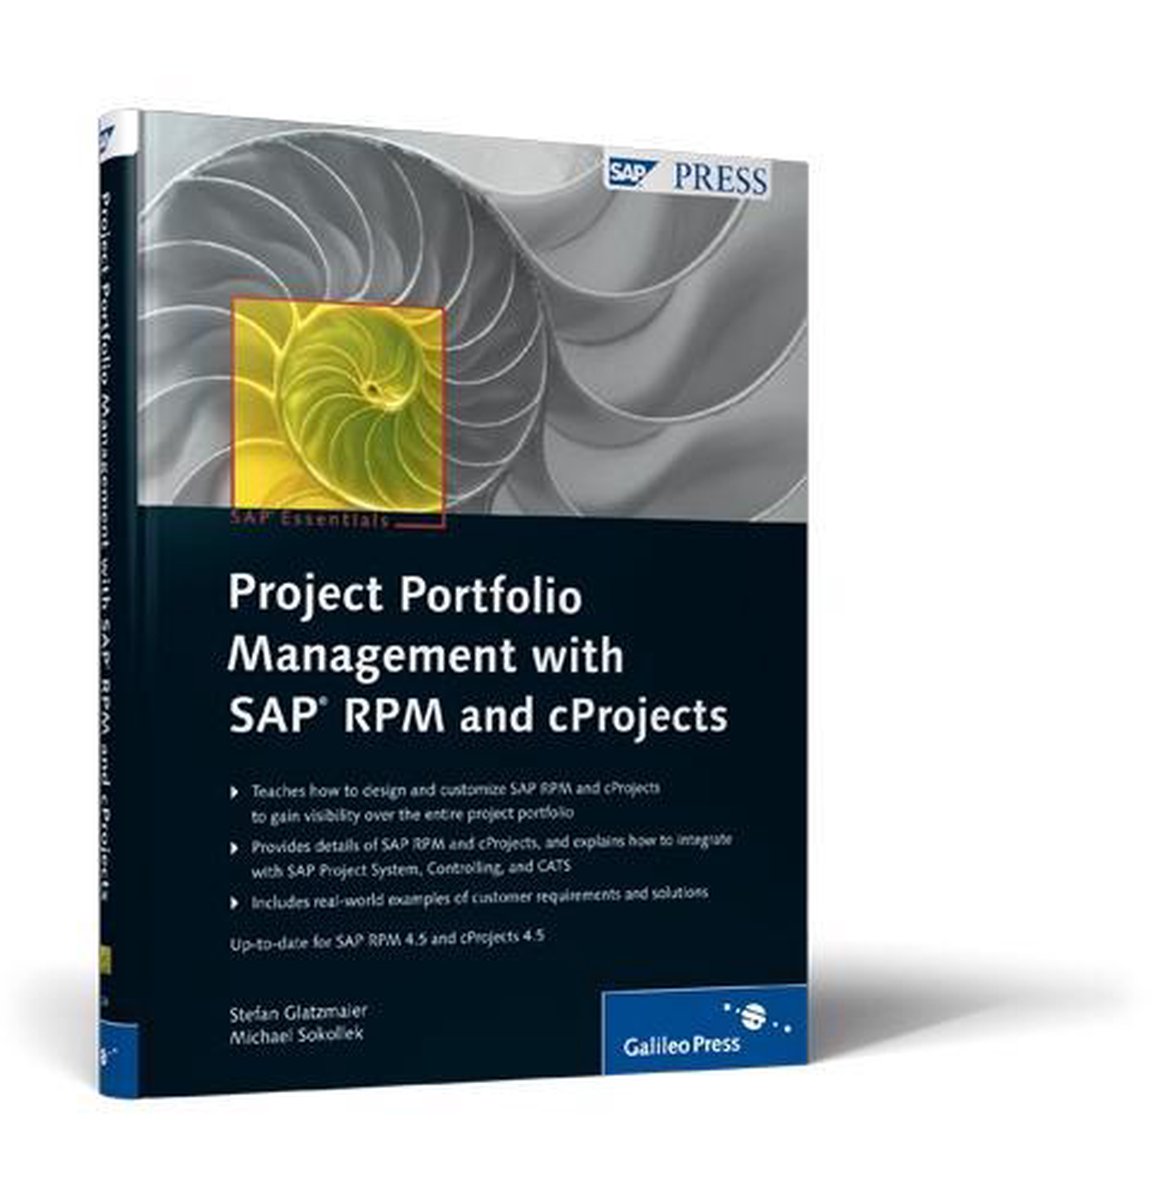 Project Portfolio Management with cProjects and SAP RPM